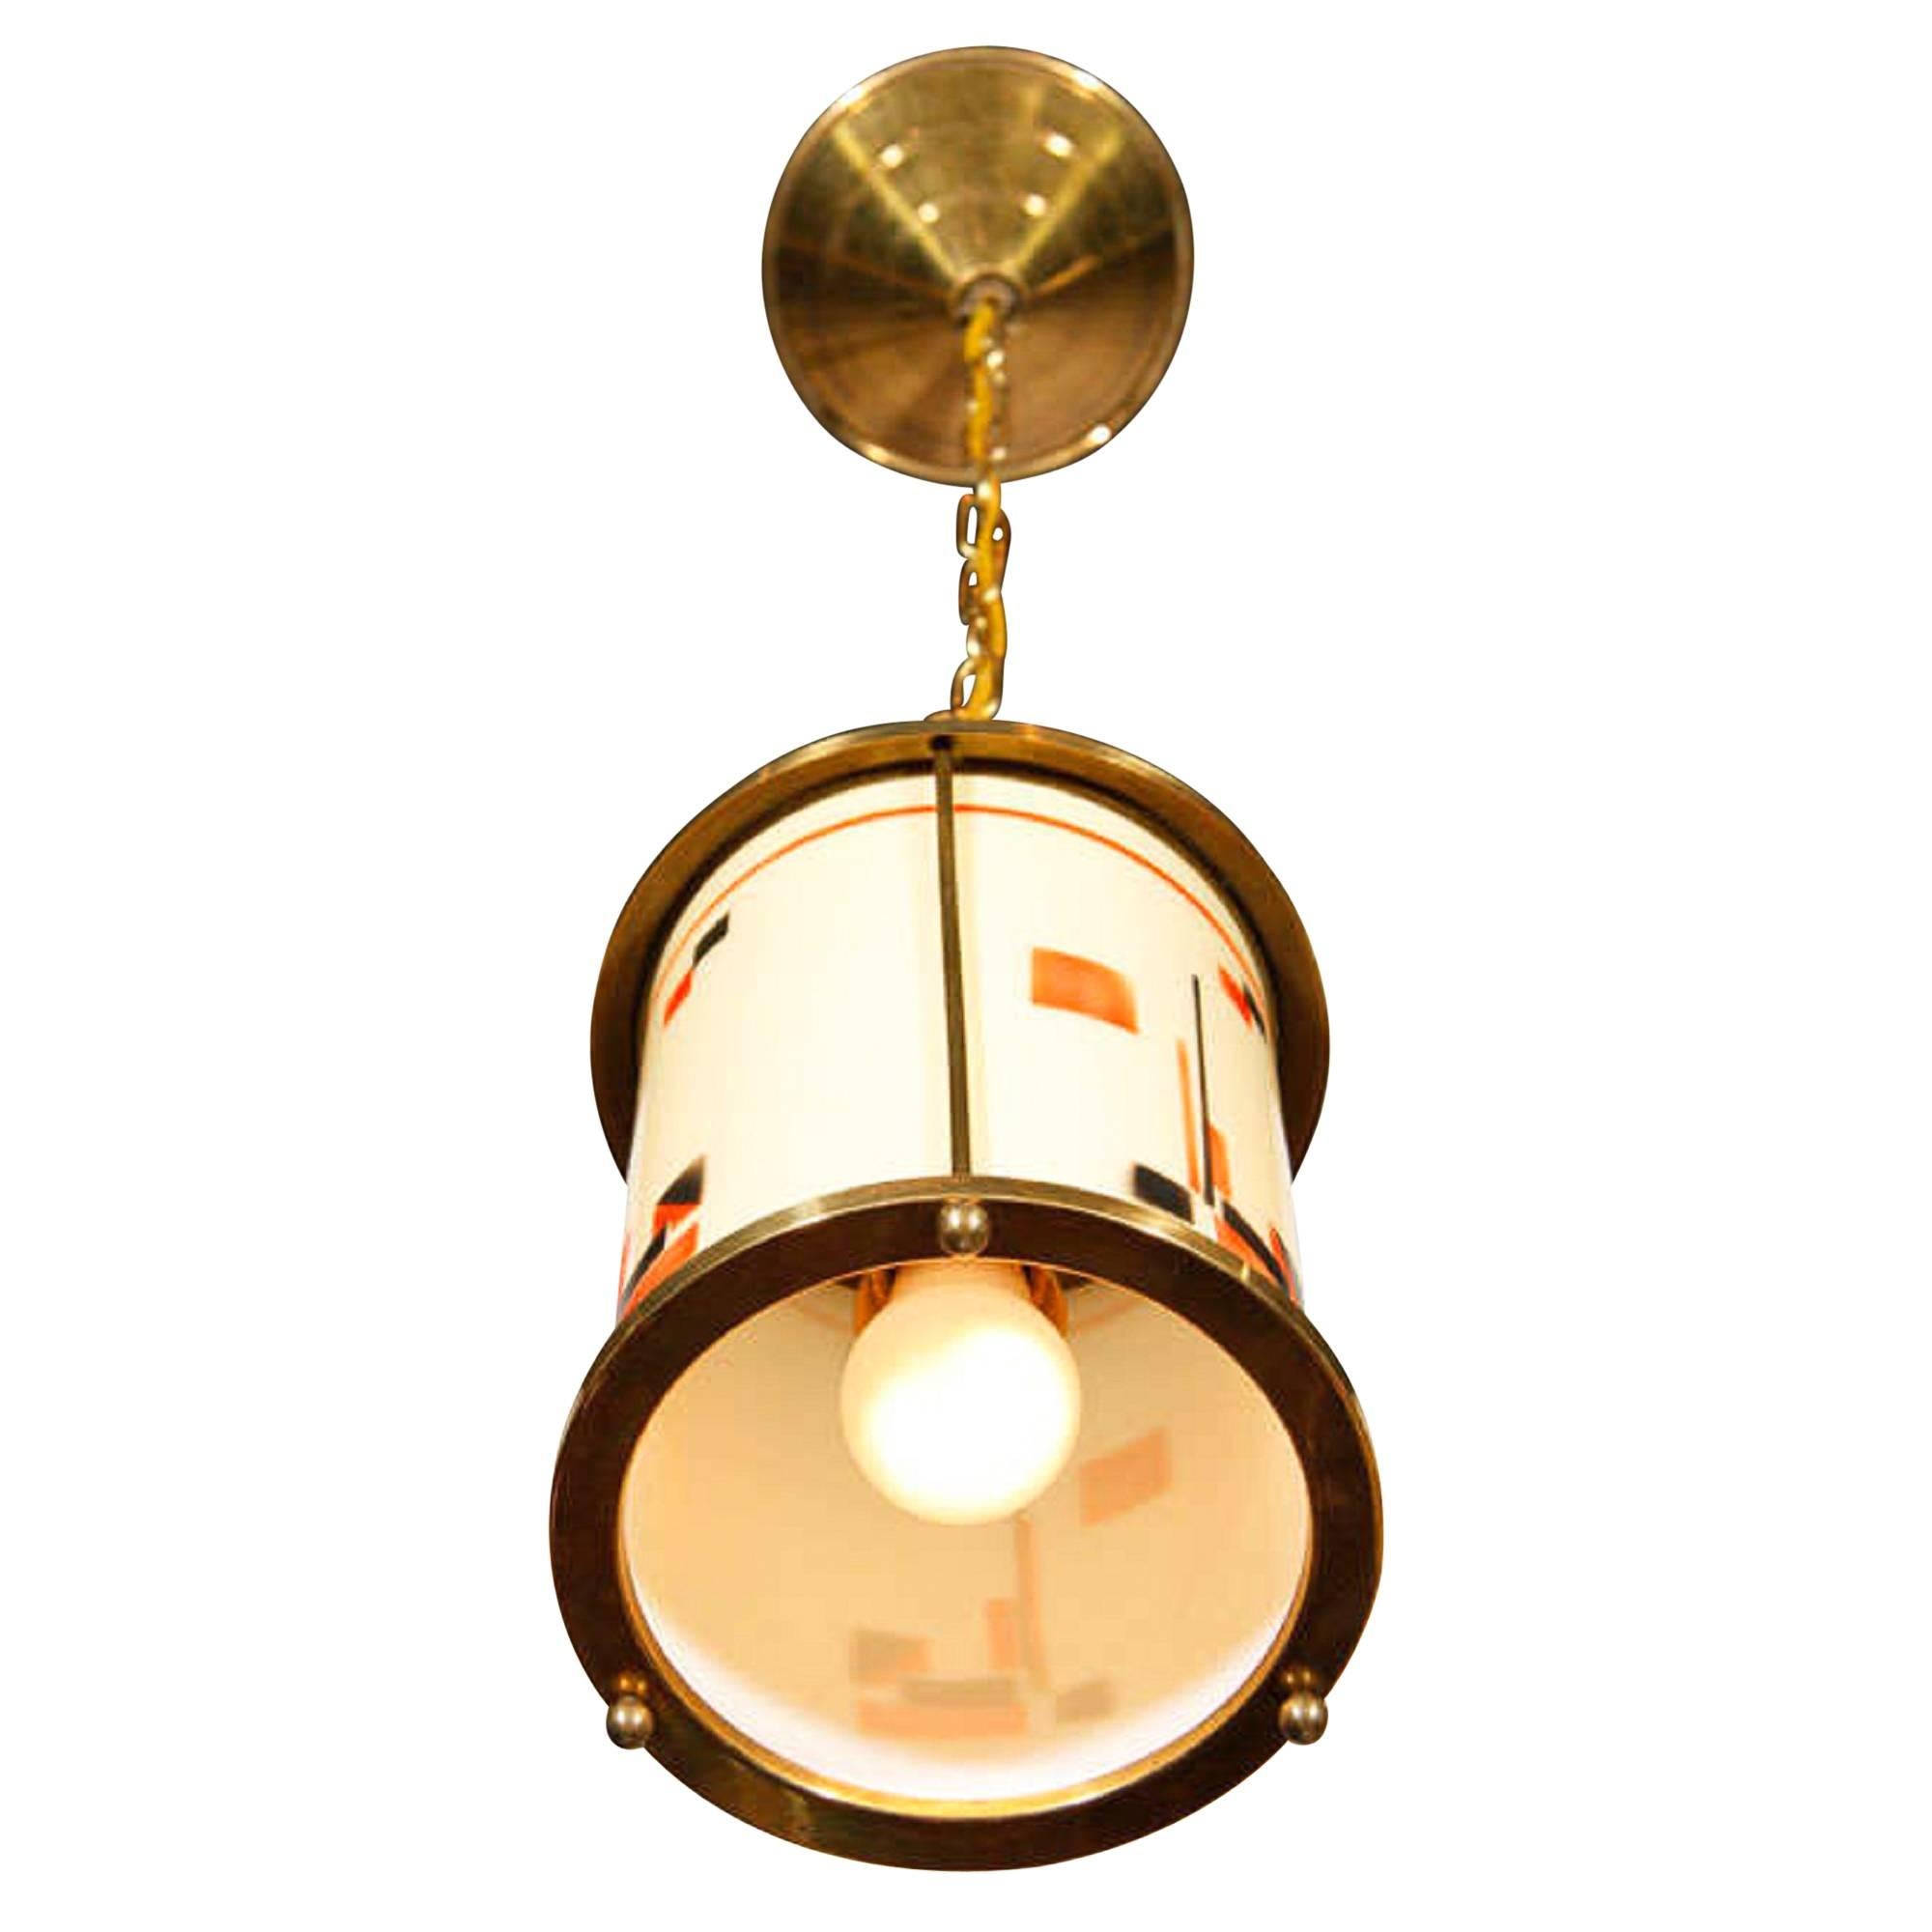 Hanging lamp, the glass shade decorated with Art Deco motifs, of cylindrical form with bronze top and bottom rings, German, 1920s. Suspended by a chain from the ceiling canopy. Measures: Fixture diameter 6 3/4 in, height of fixture 8 in. 
          